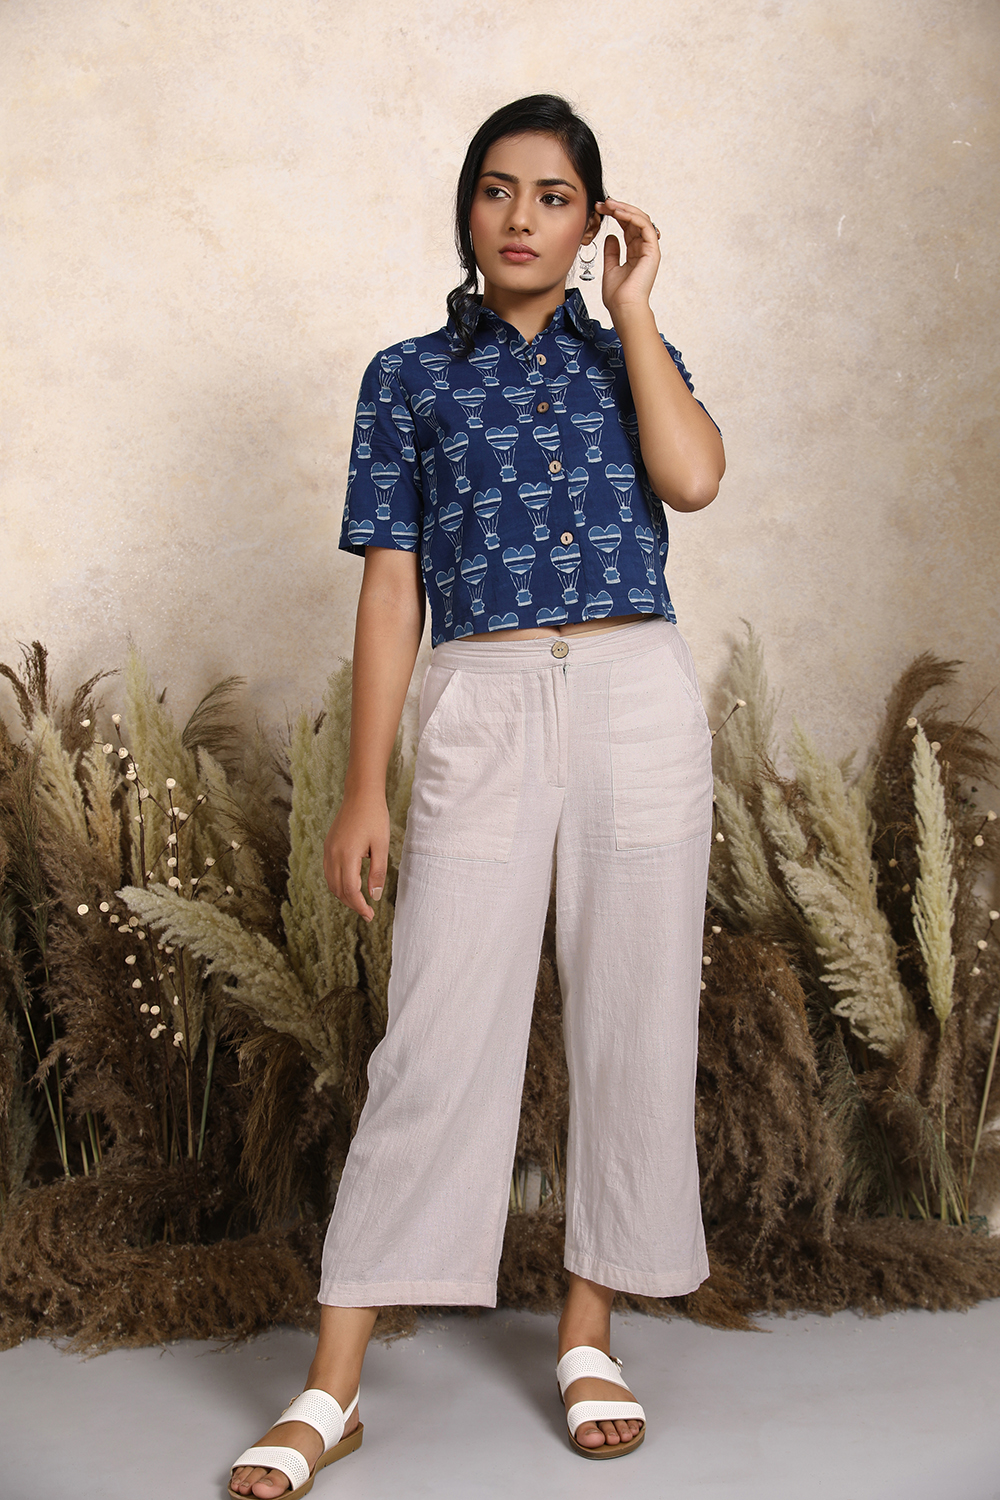 Handwoven Kala Cotton Tie-up Waist Wideleg Pants in White. Women's ankle length cotton pants by Vegan clothing brands India